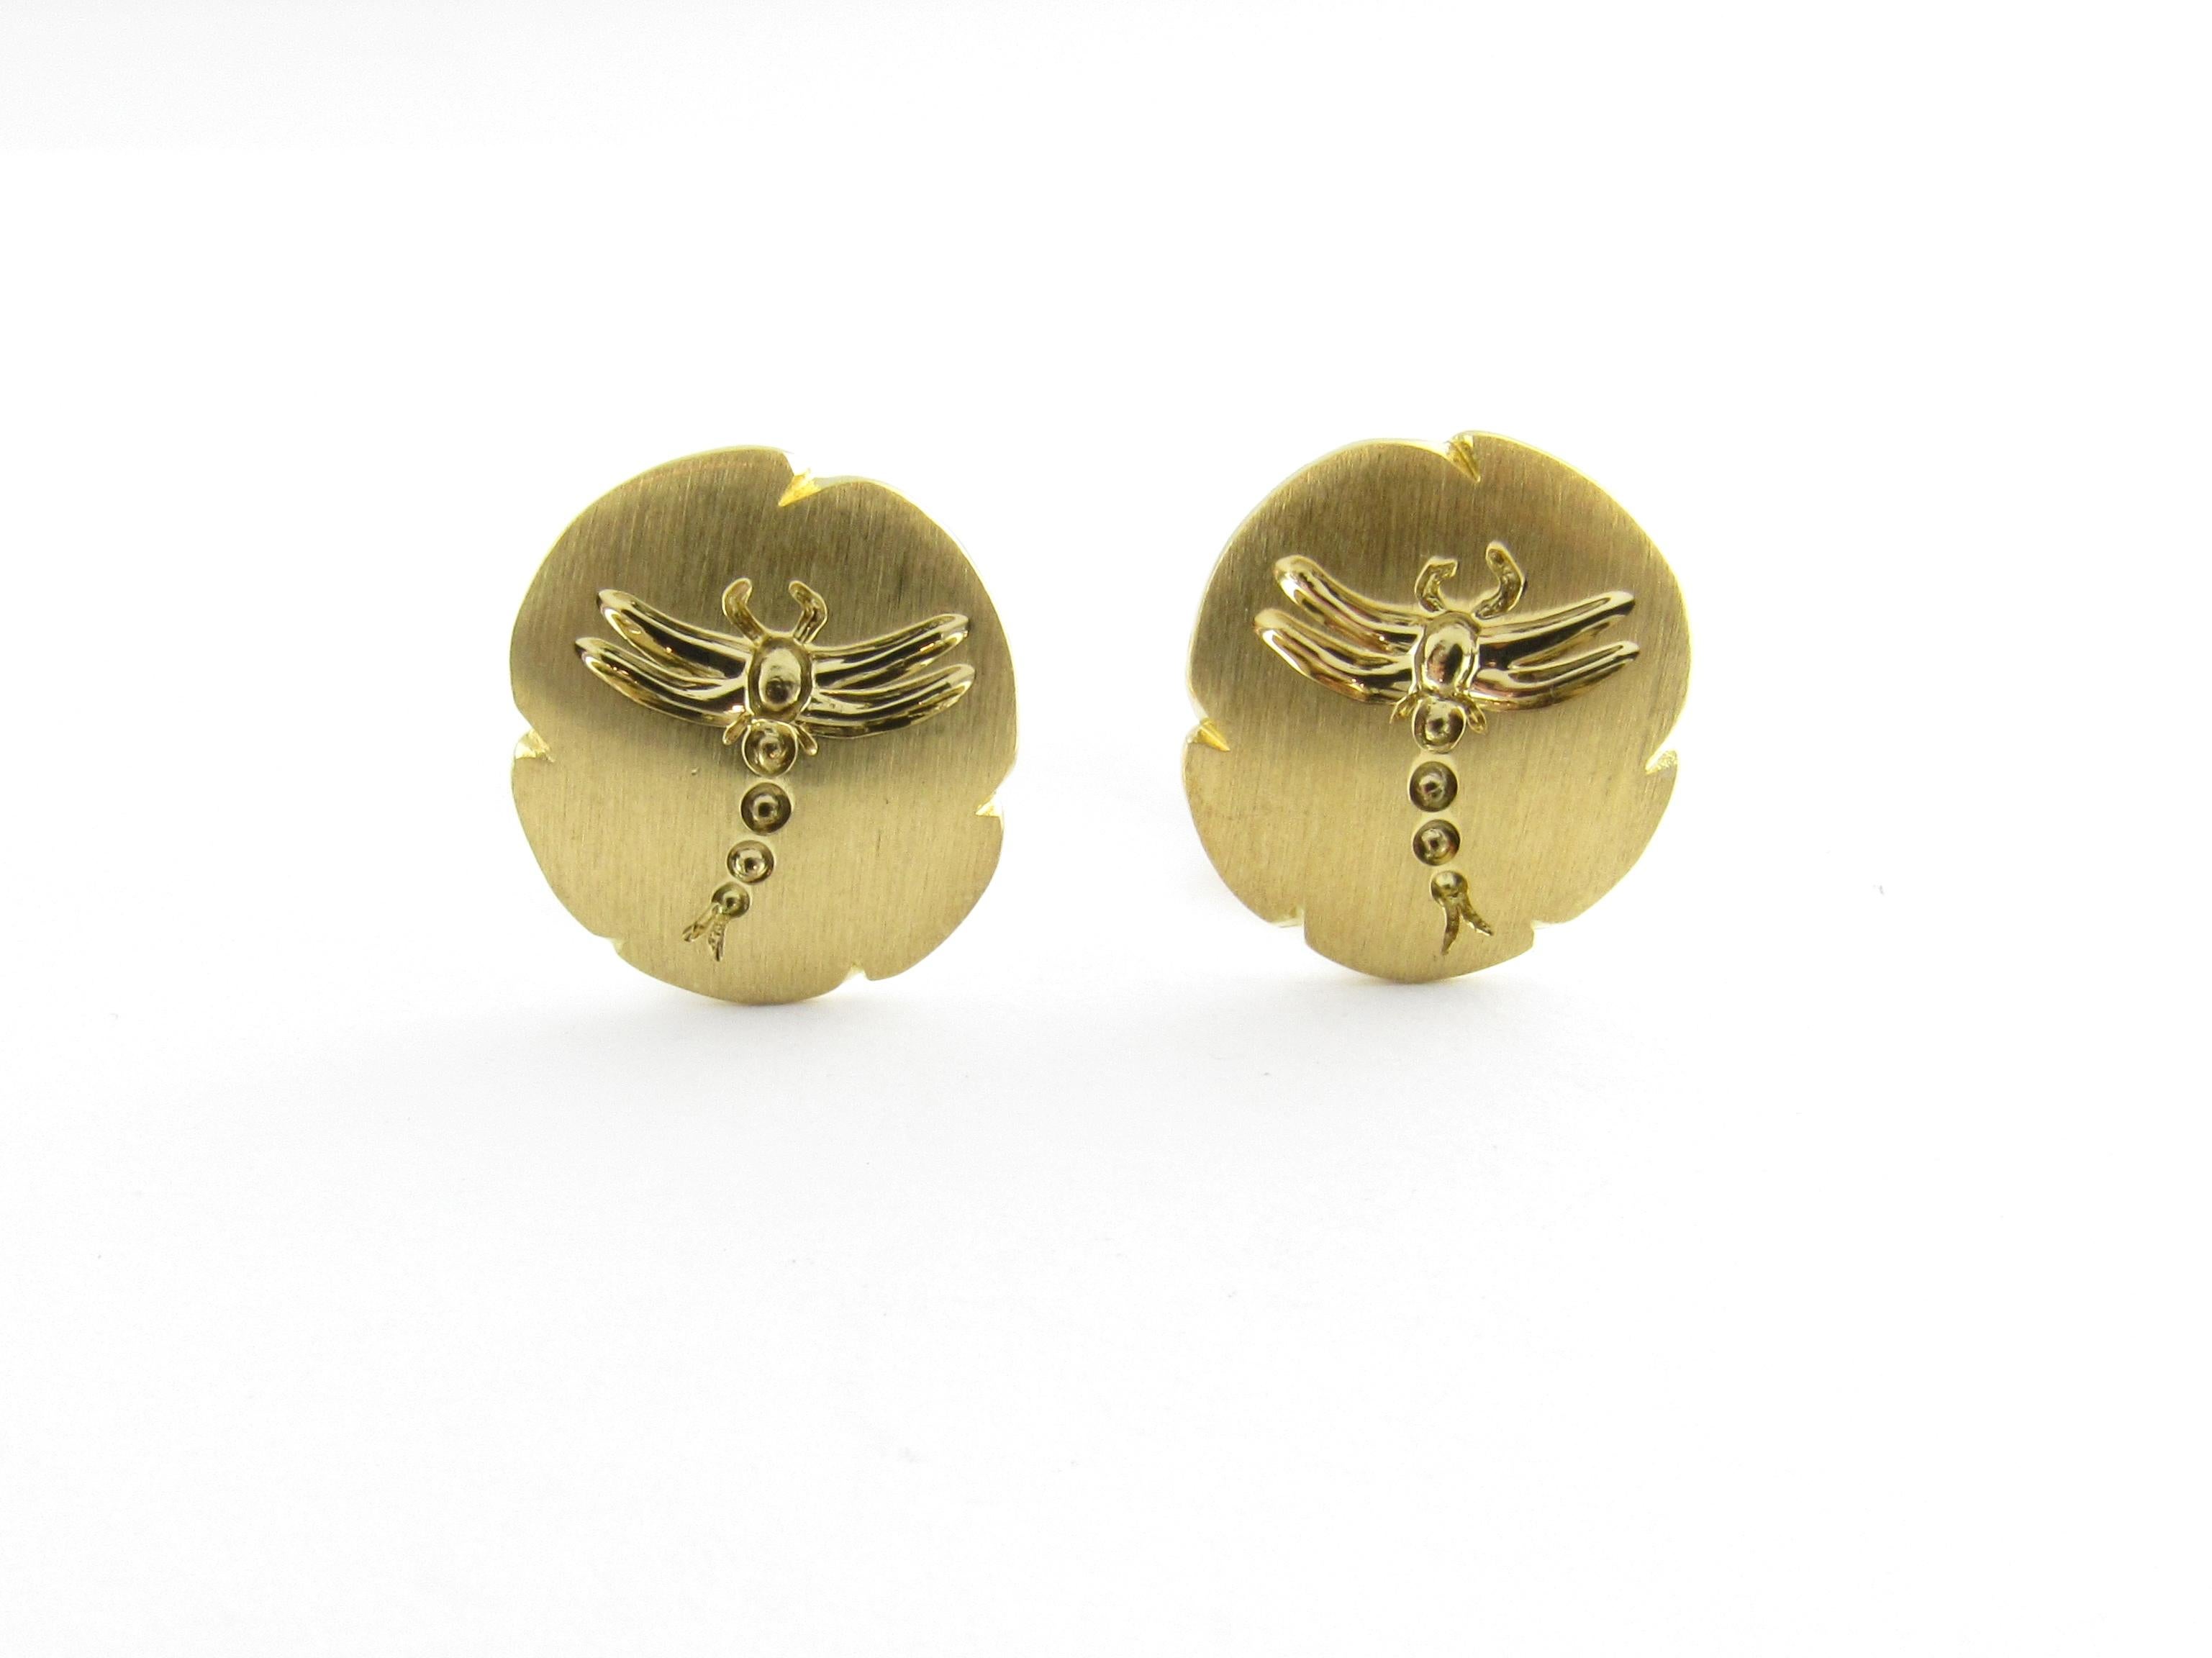 Vintage Tiffany and Co. 18 Karat Yellow Gold Dragonfly Clip On Earrings

These elegant earrings are each decorated with a lovely dragonfly crafted in beautifully detailed 18K yellow gold. Clip on closures.

Size: 16 mm x 14 mm

Weight: 6.1 dwt. /